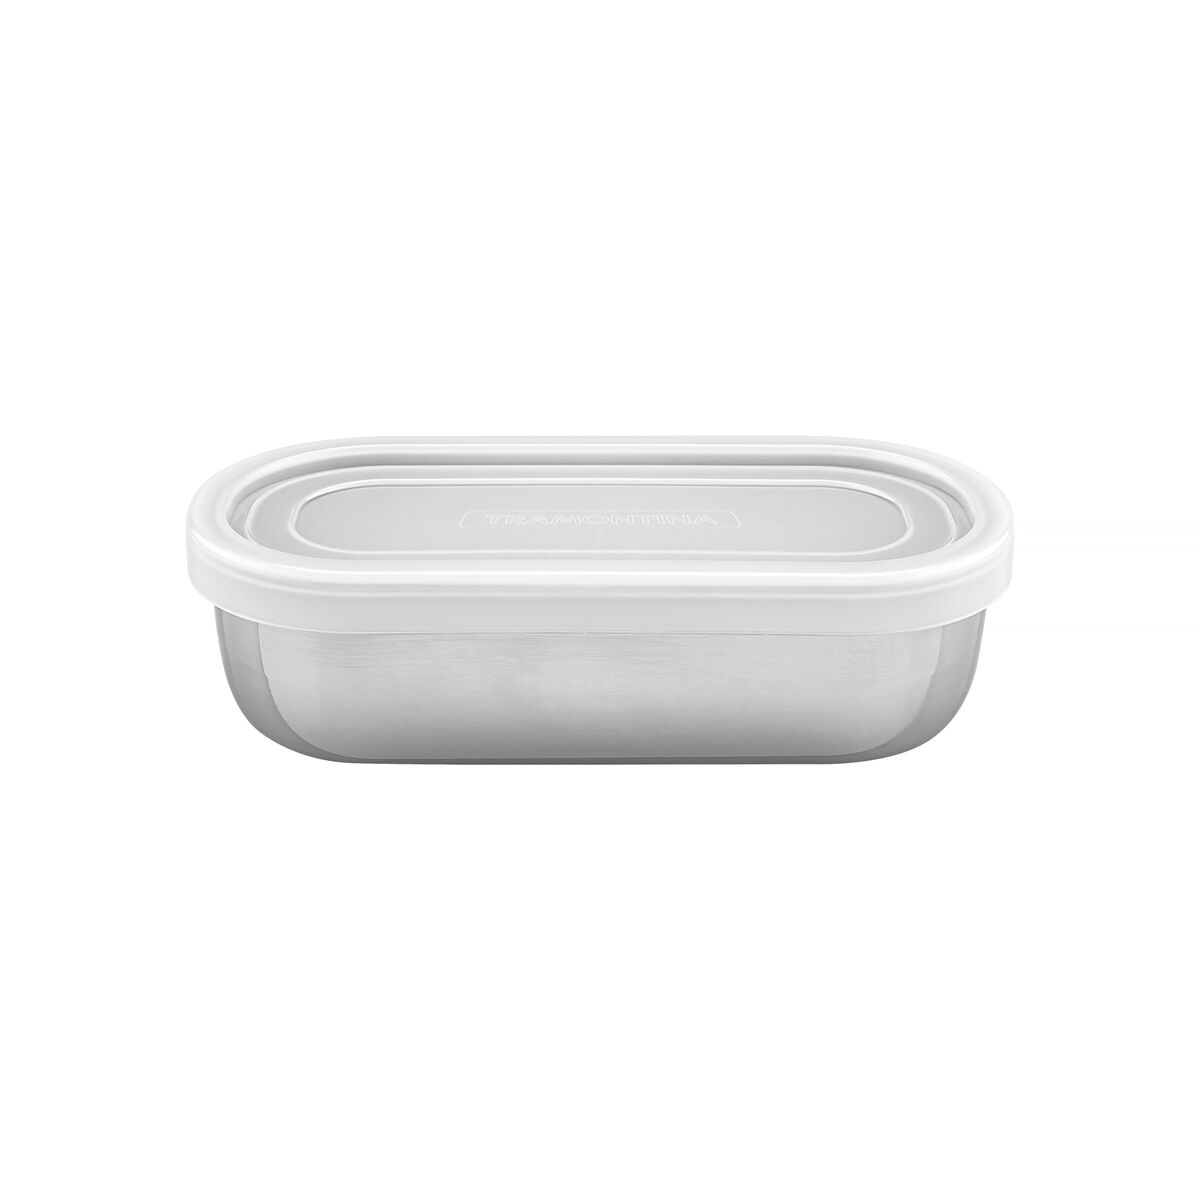 Tramontina Freezinox stainless steel lunch container with plastic lid, 0.4 L